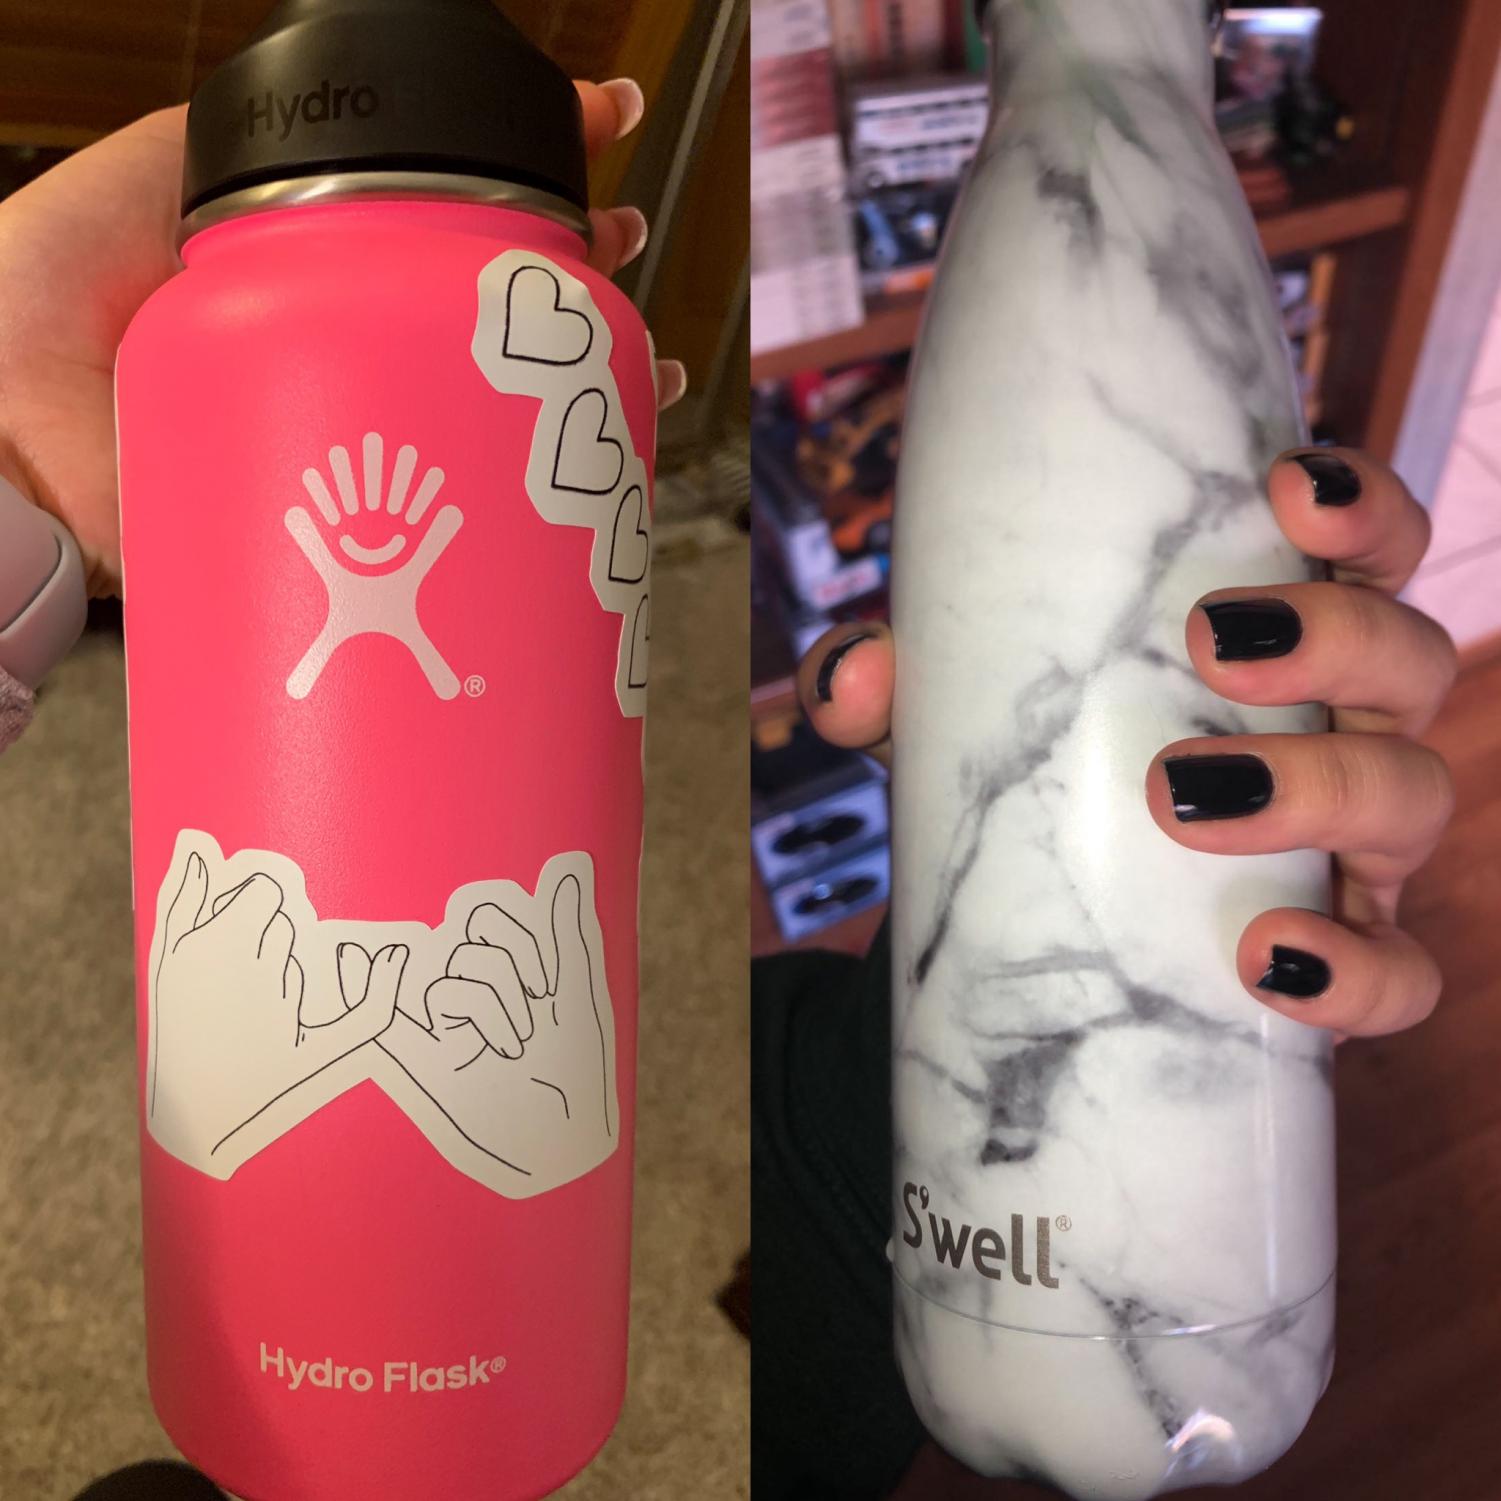 How to fix a dent in a Hydroflask 